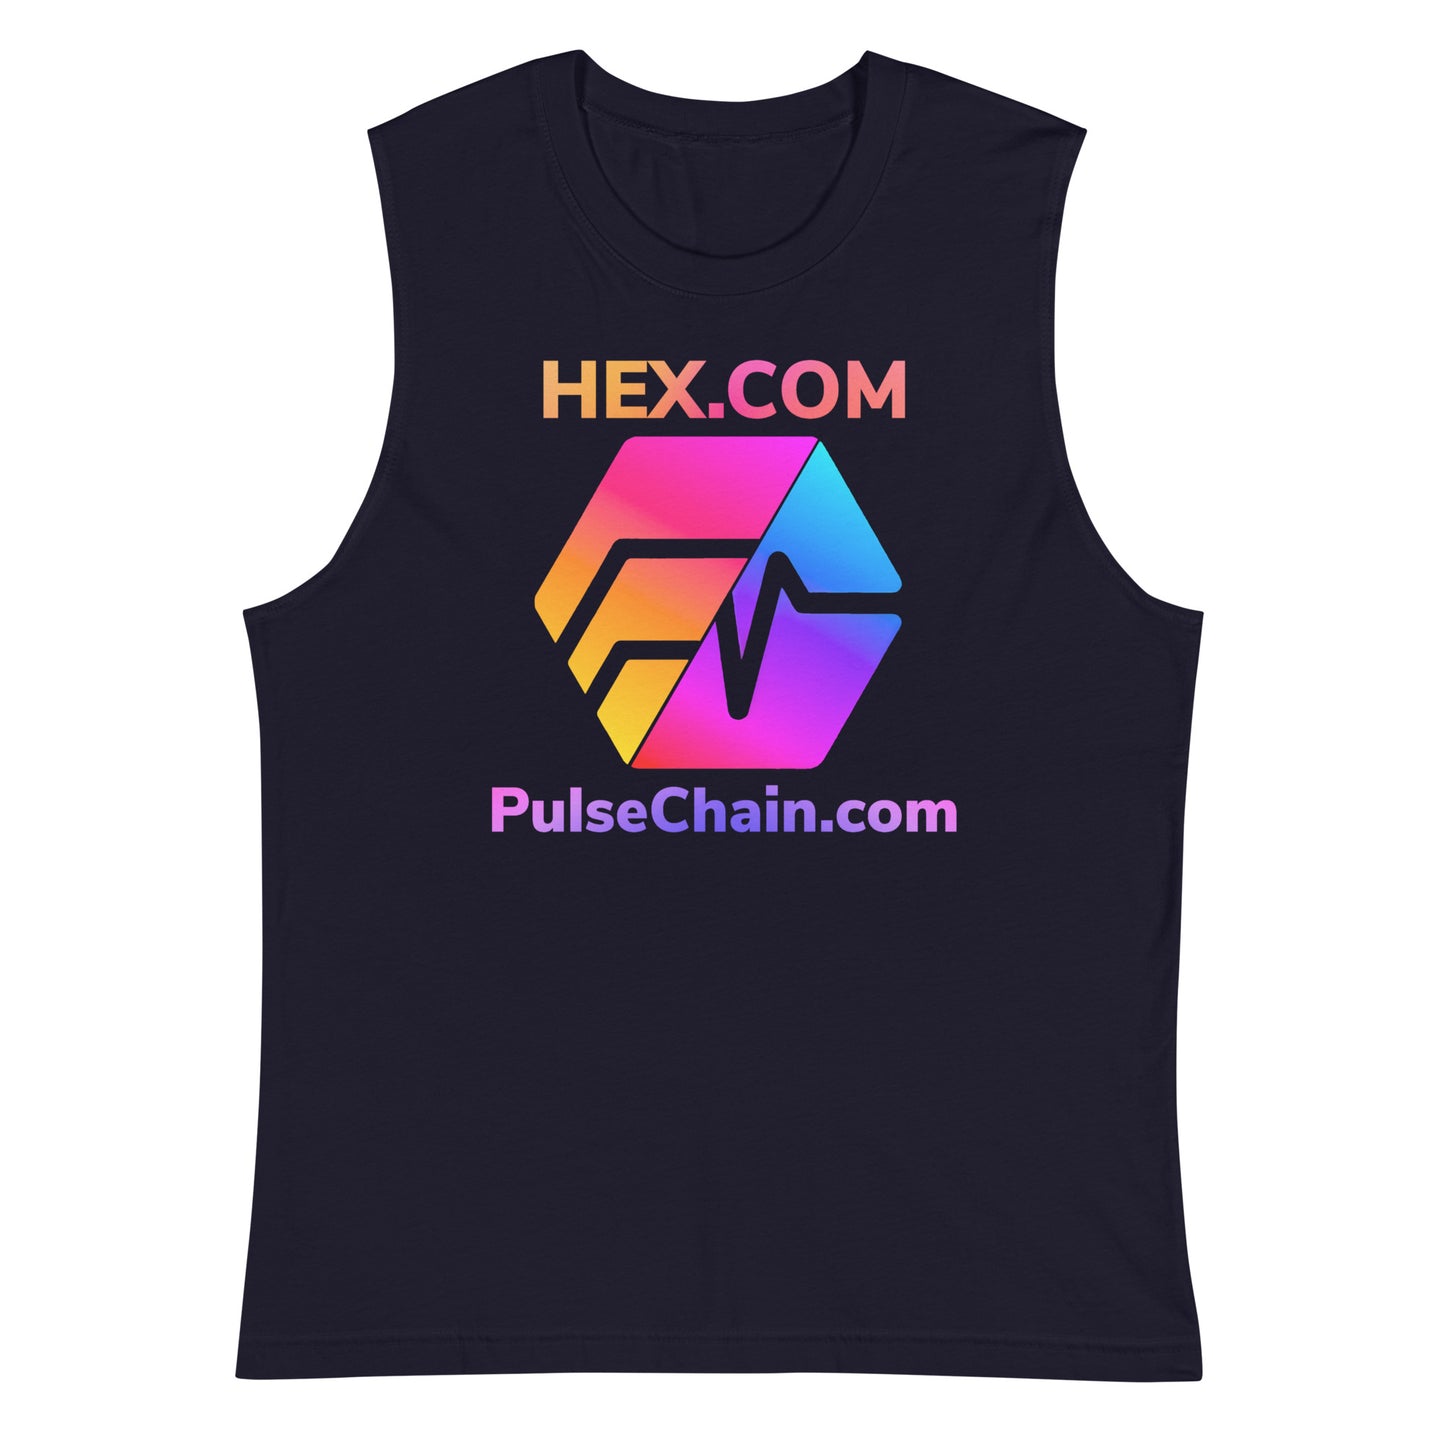 HEX.COM and PulseChain.com Unisex Muscle Shirt